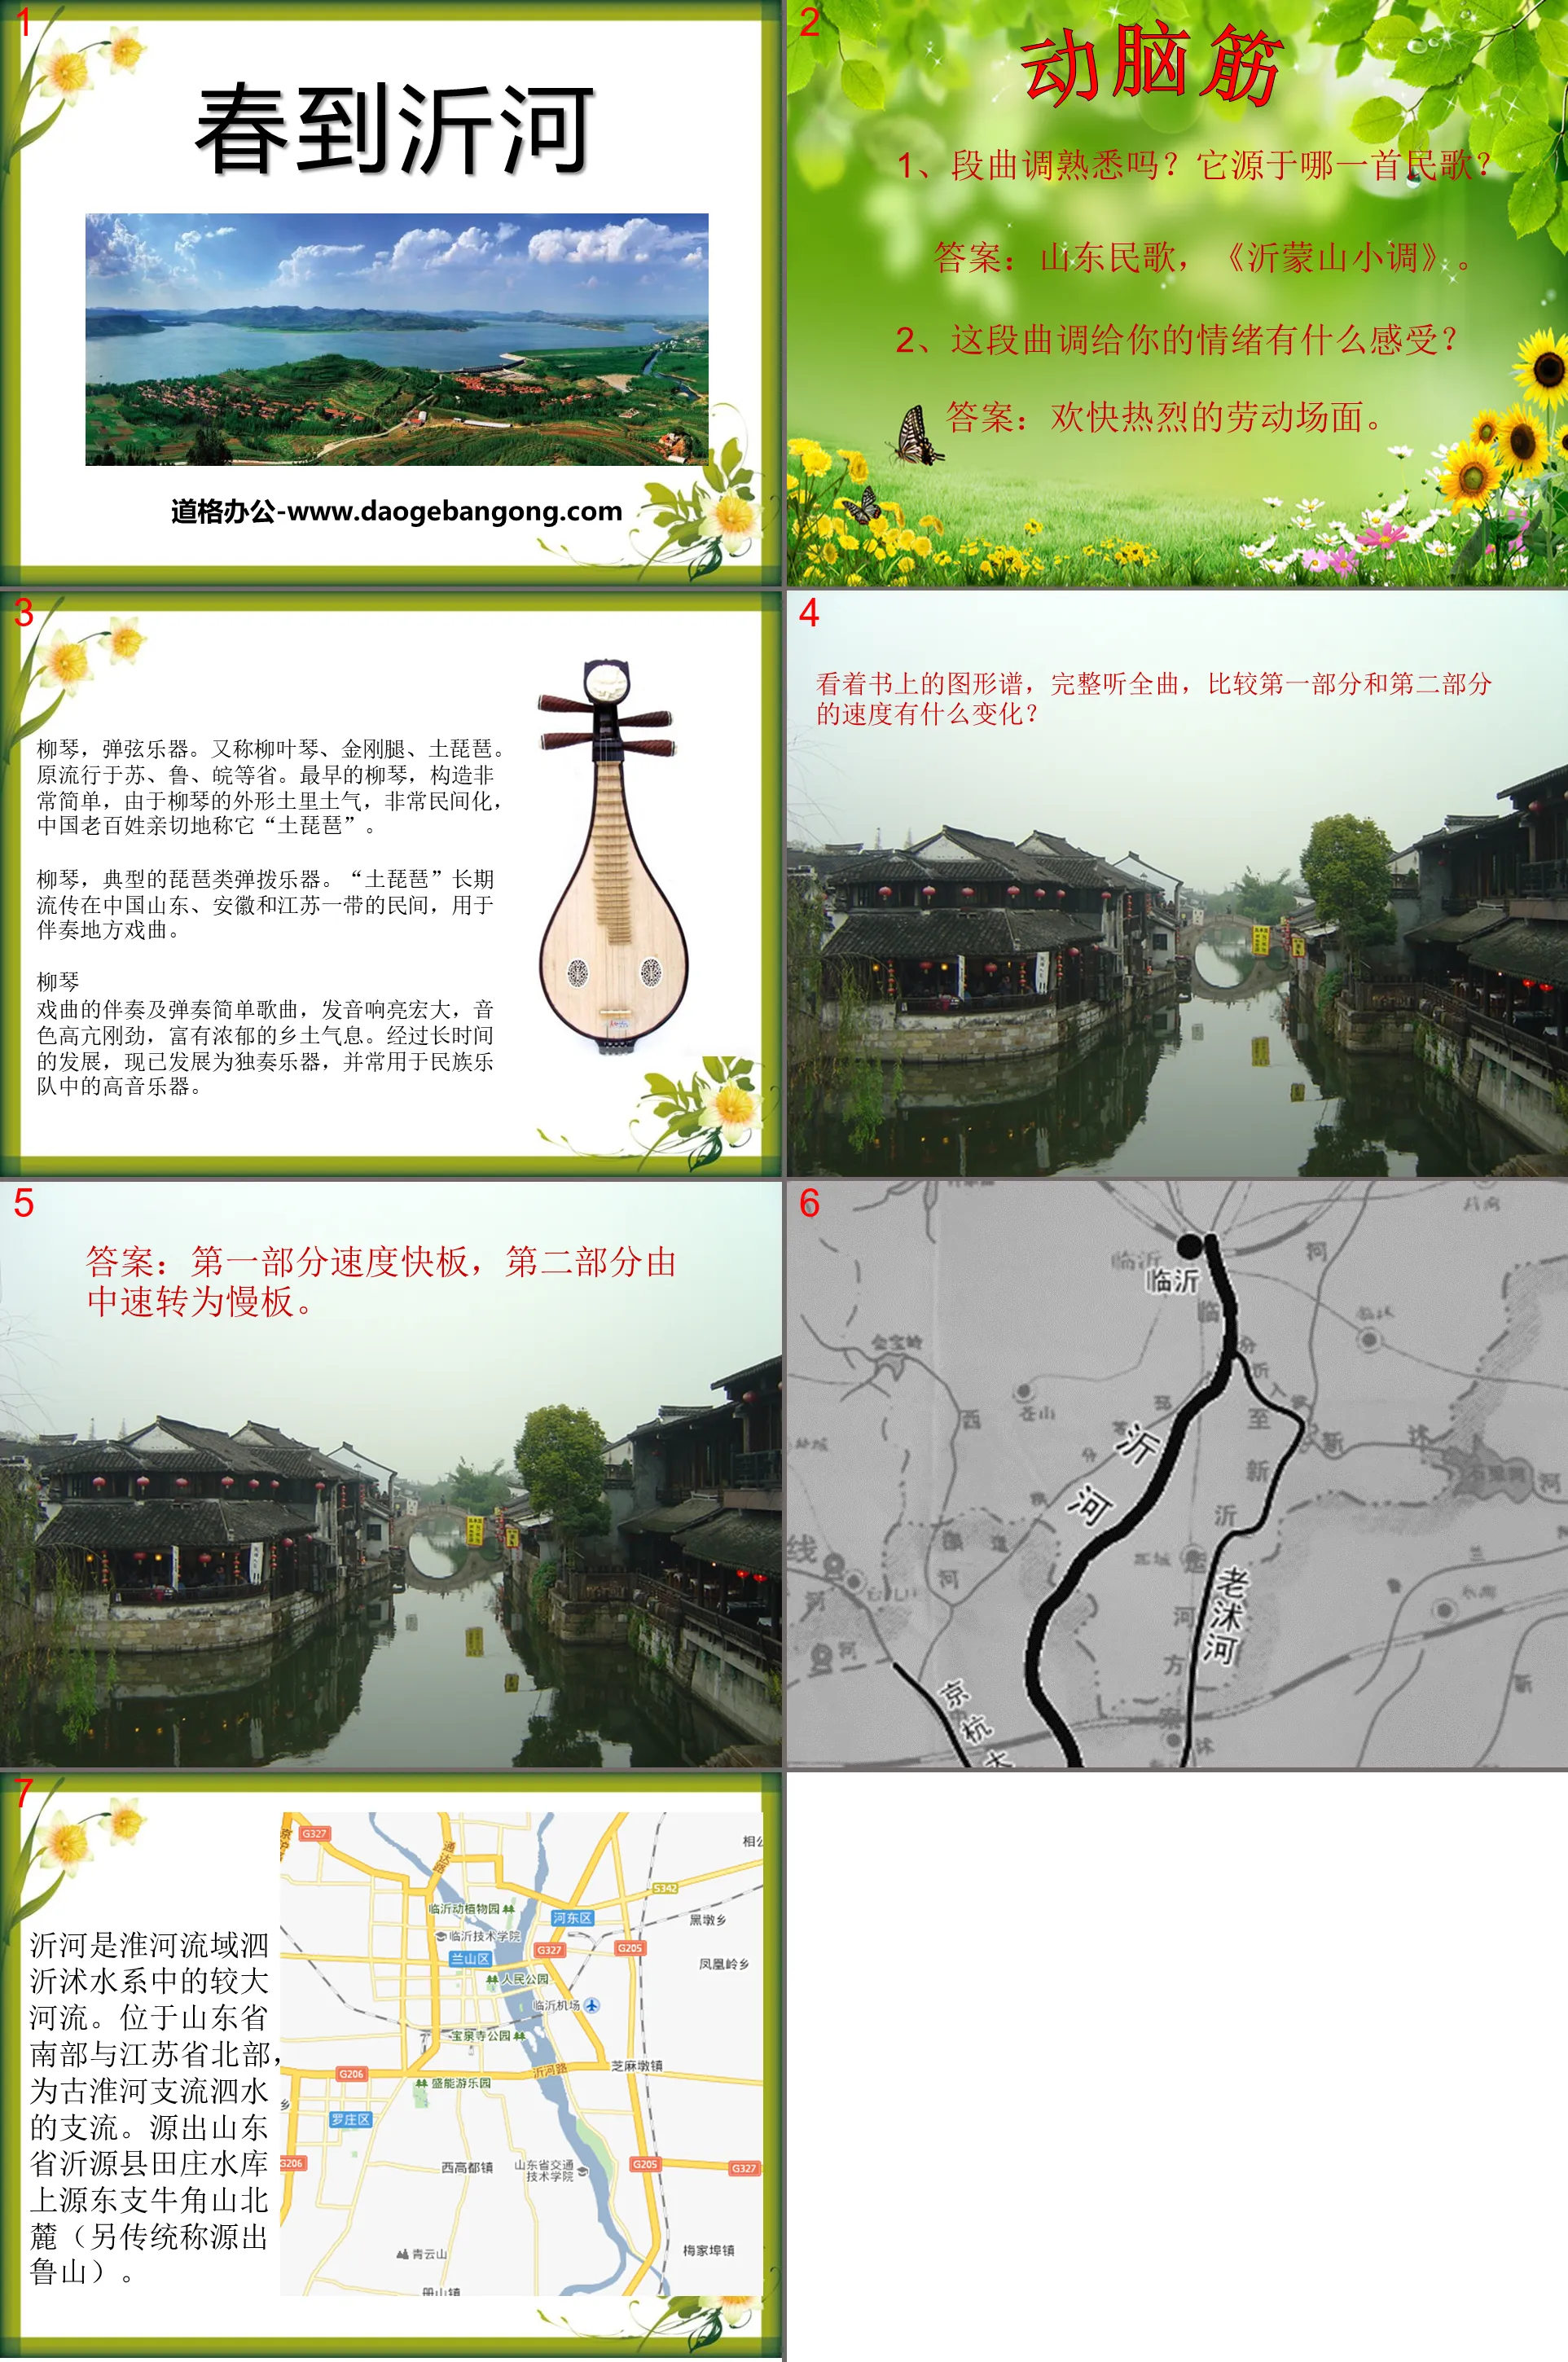 "Spring Arrives in Yihe" PPT Courseware 2